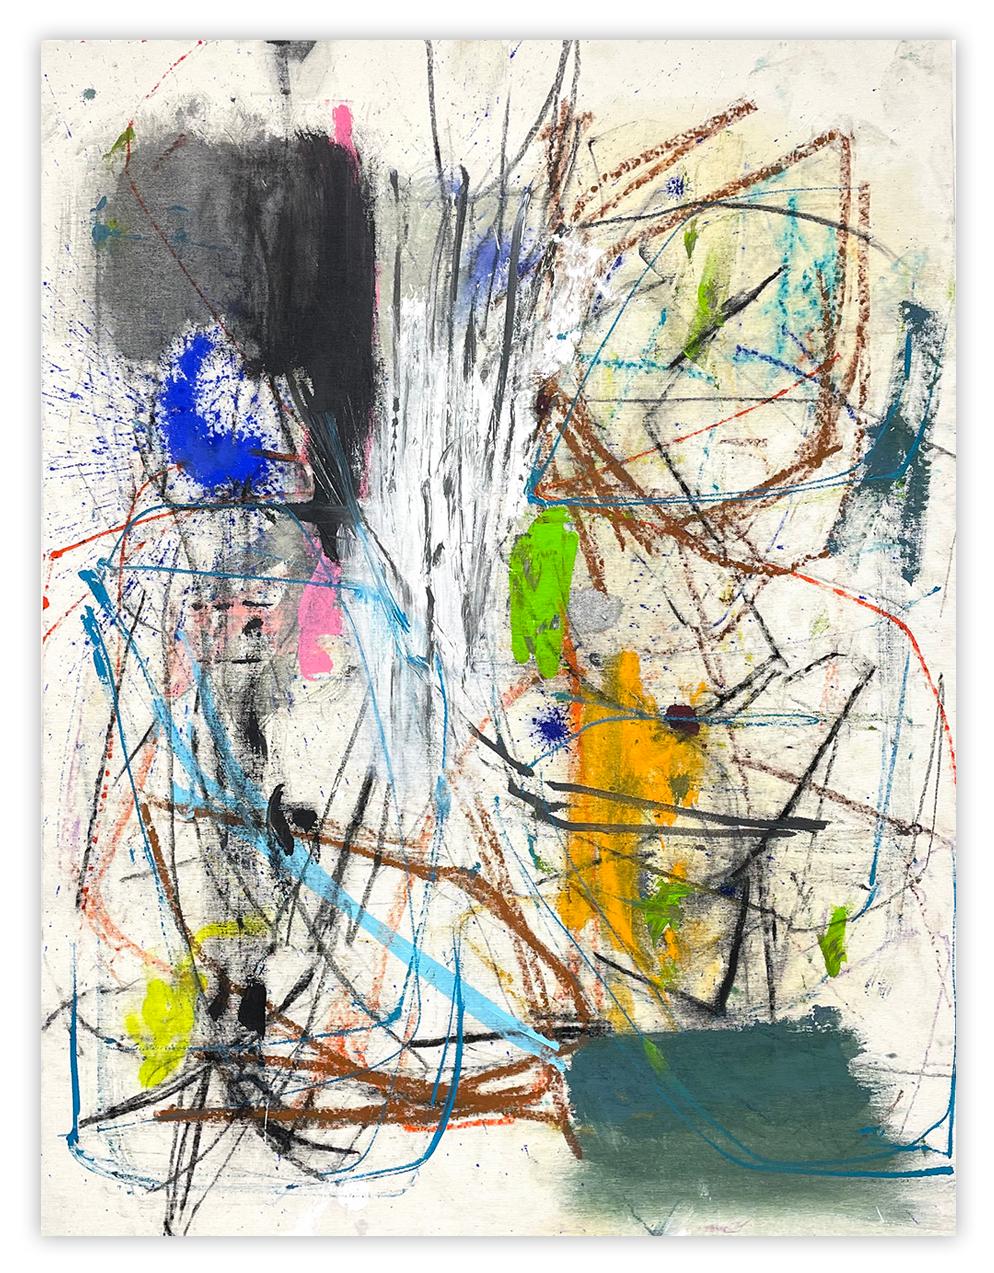 Untitled 41 (Abstract Painting)
Mixed Media on Canvas — Unframed.
This artwork will be shipped rolled in a dent-resistant tube.
This method is especially safe for large works, and provides lower shipping costs as well. 
Rolled works can be easily